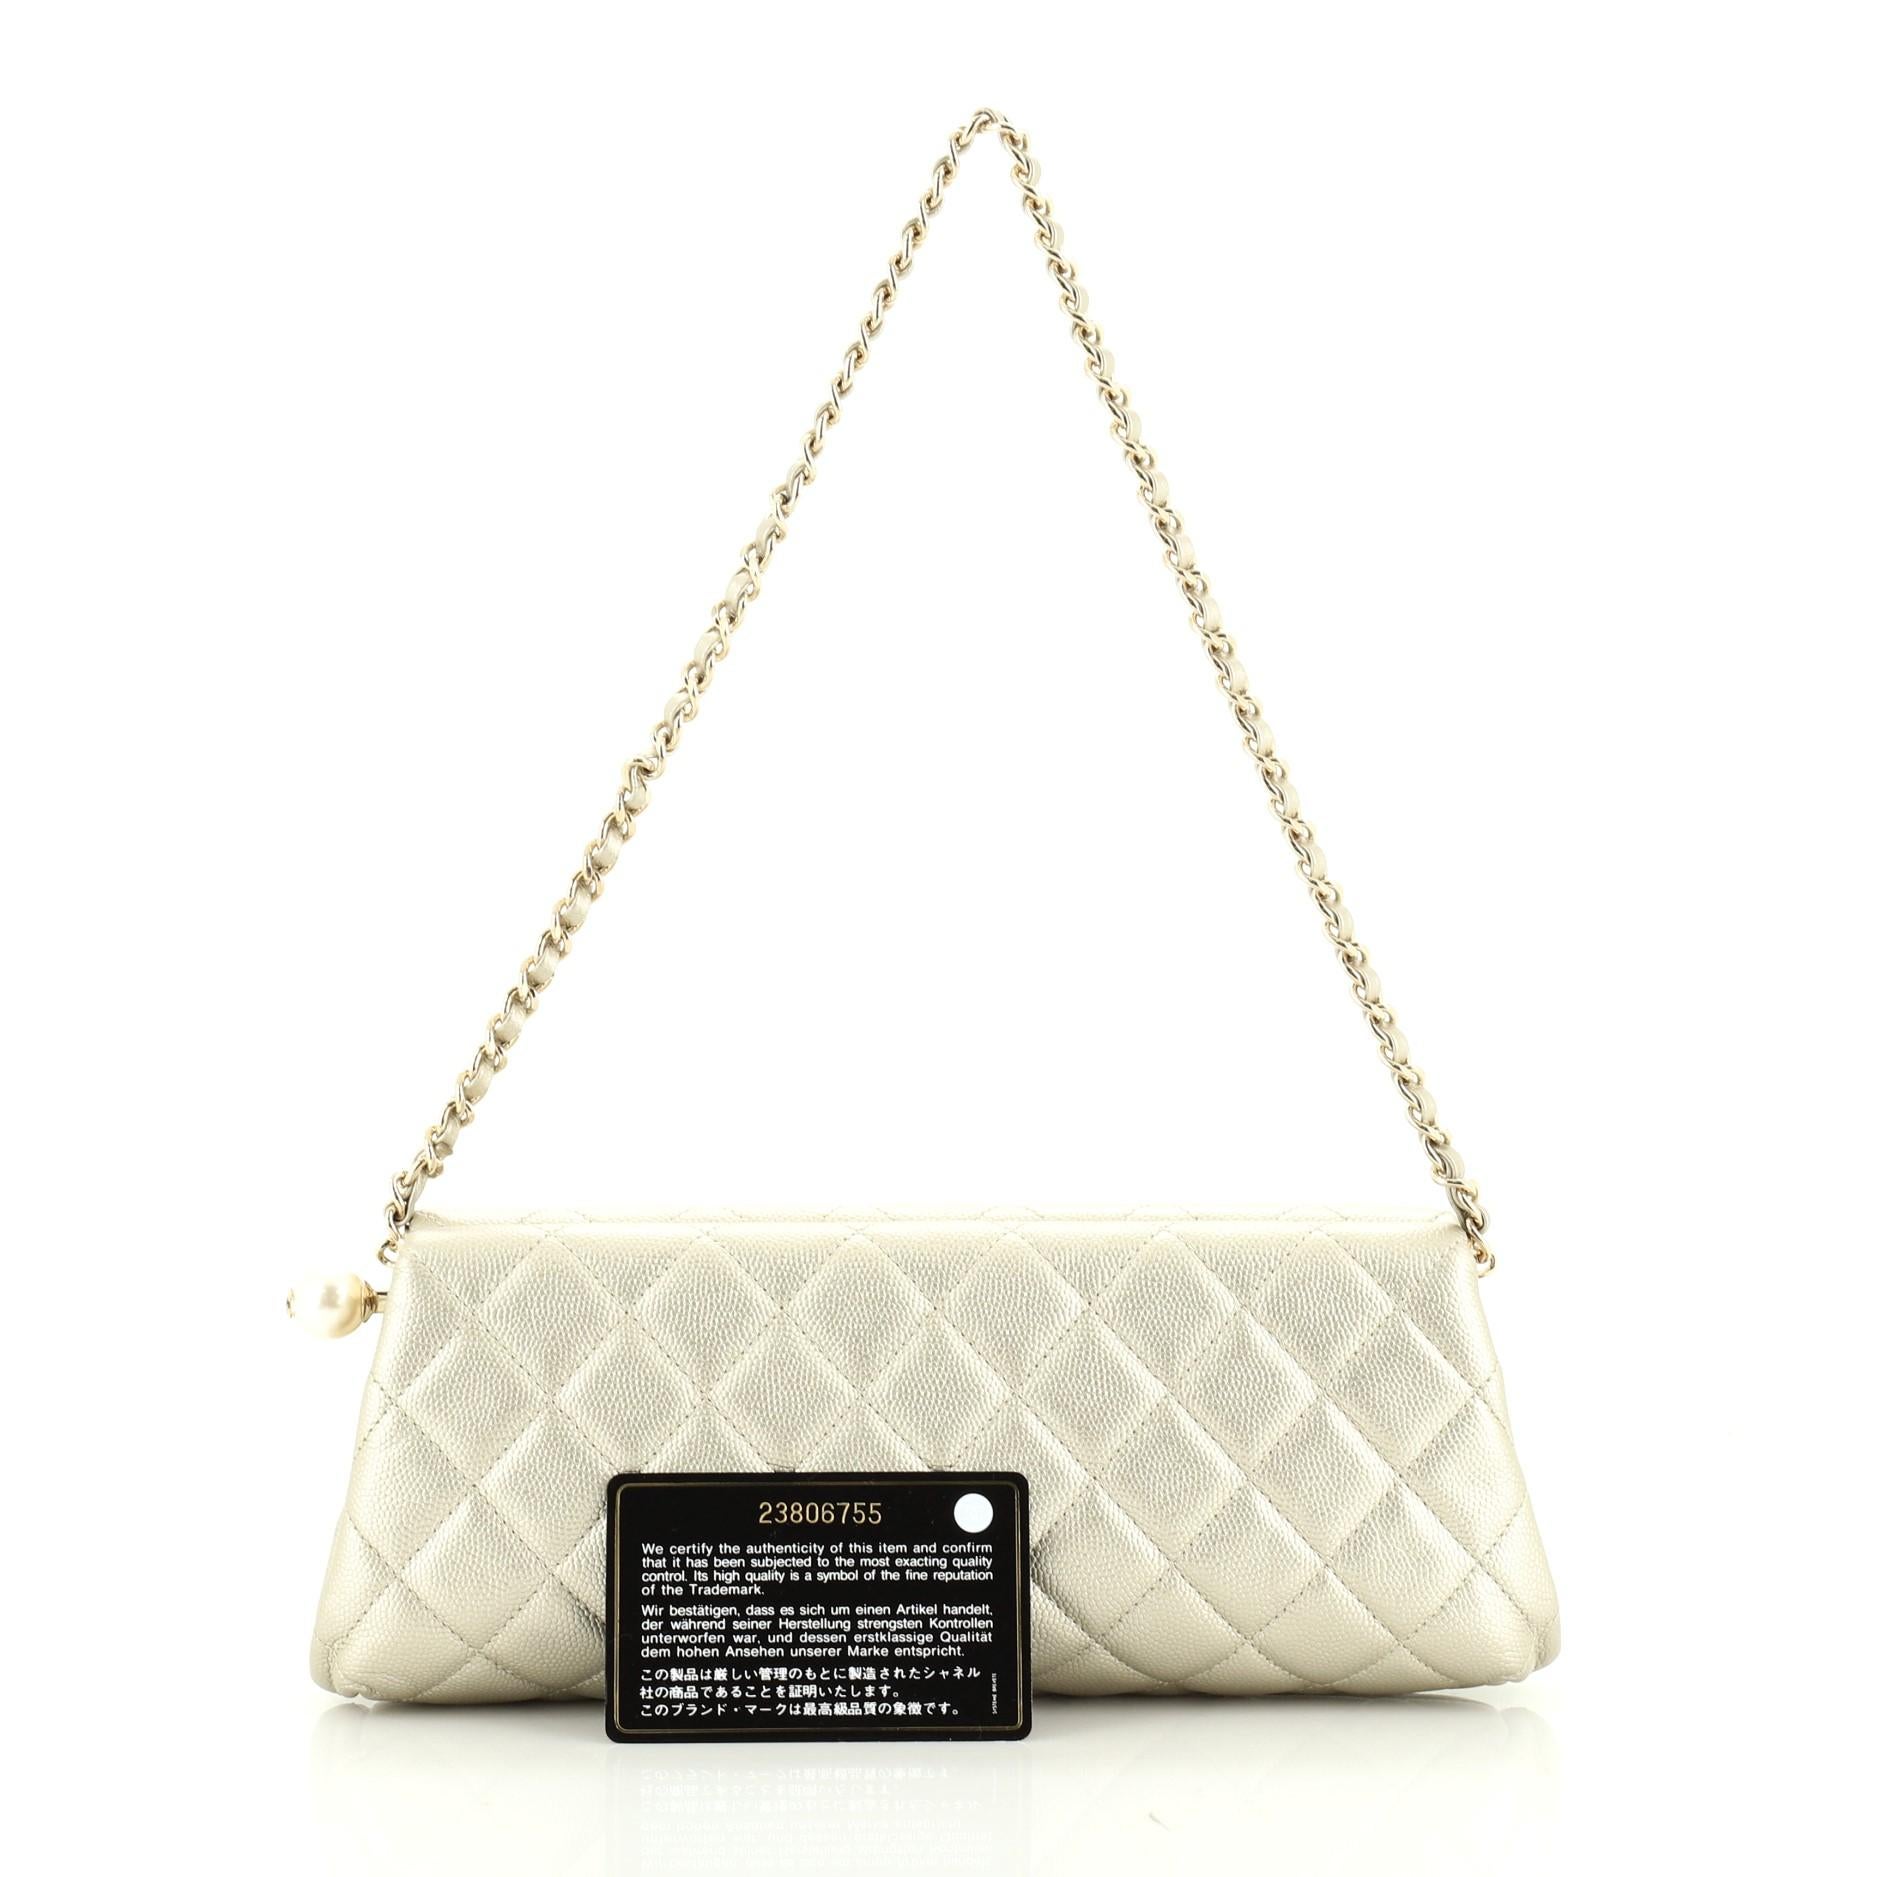 This Chanel Pearl Chain Clutch Quilted Caviar, crafted from gold leather, features chain link strap and gold tone hardware. Its closure opens to a gold satin interior. Hologram sticker reads: 23806755. 

Condition: Excellent. Minor wear on base